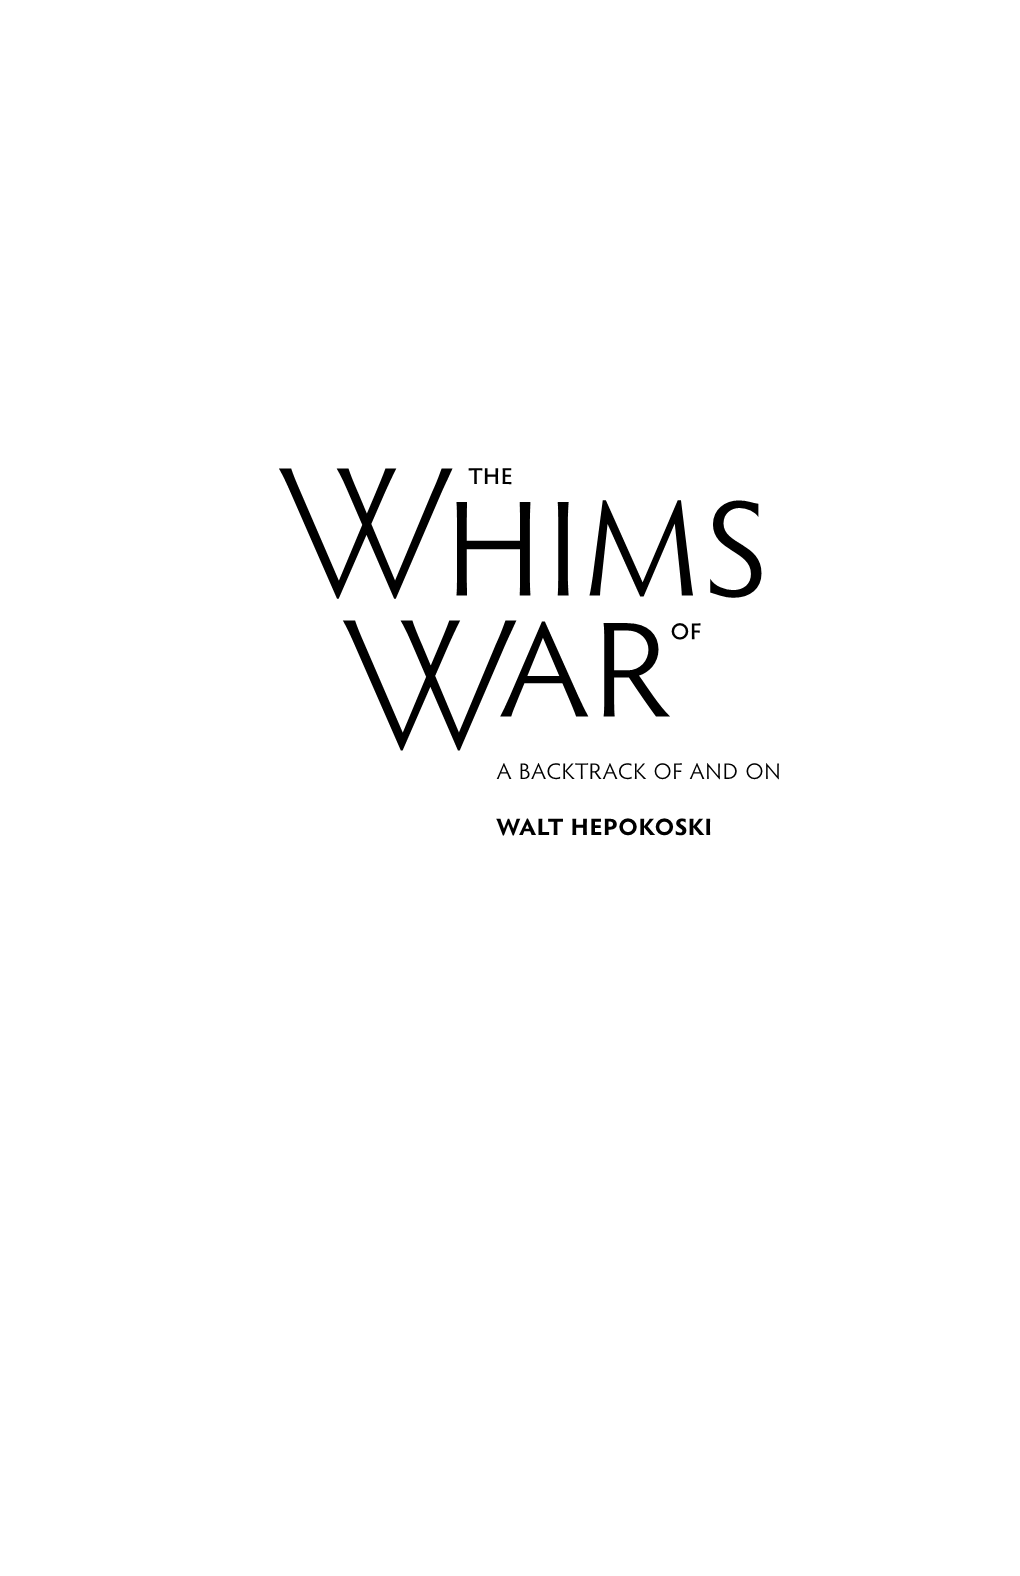 The Whims of War” Was Apparently Influenced by the Popular 1983 TV Miniseries the Winds of War